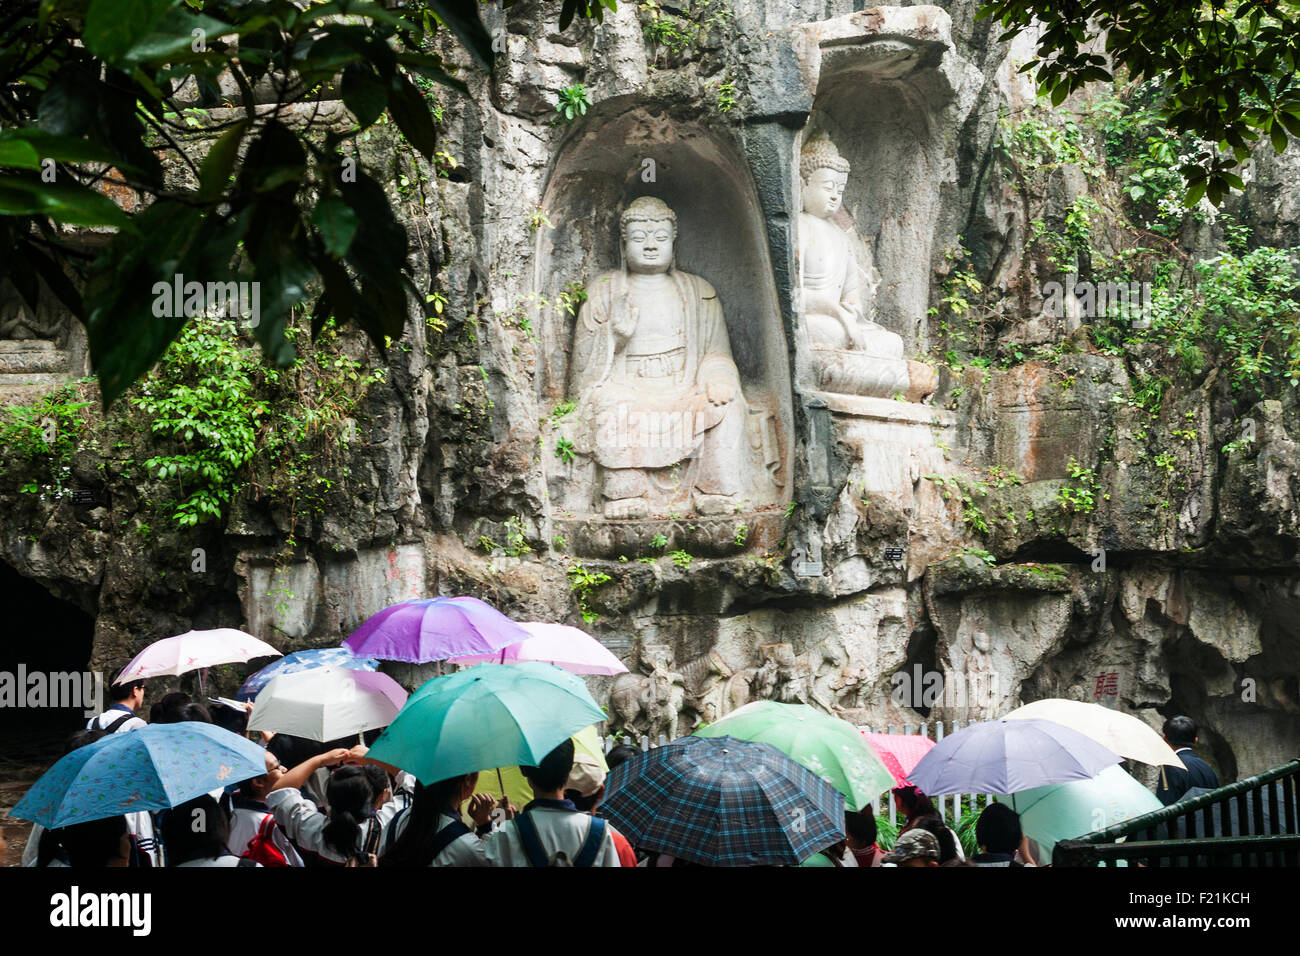 Tourists with umbrellas visiting Buddhas carved into rock face of Feilai Feng hill at Lingyin Temple Stock Photo